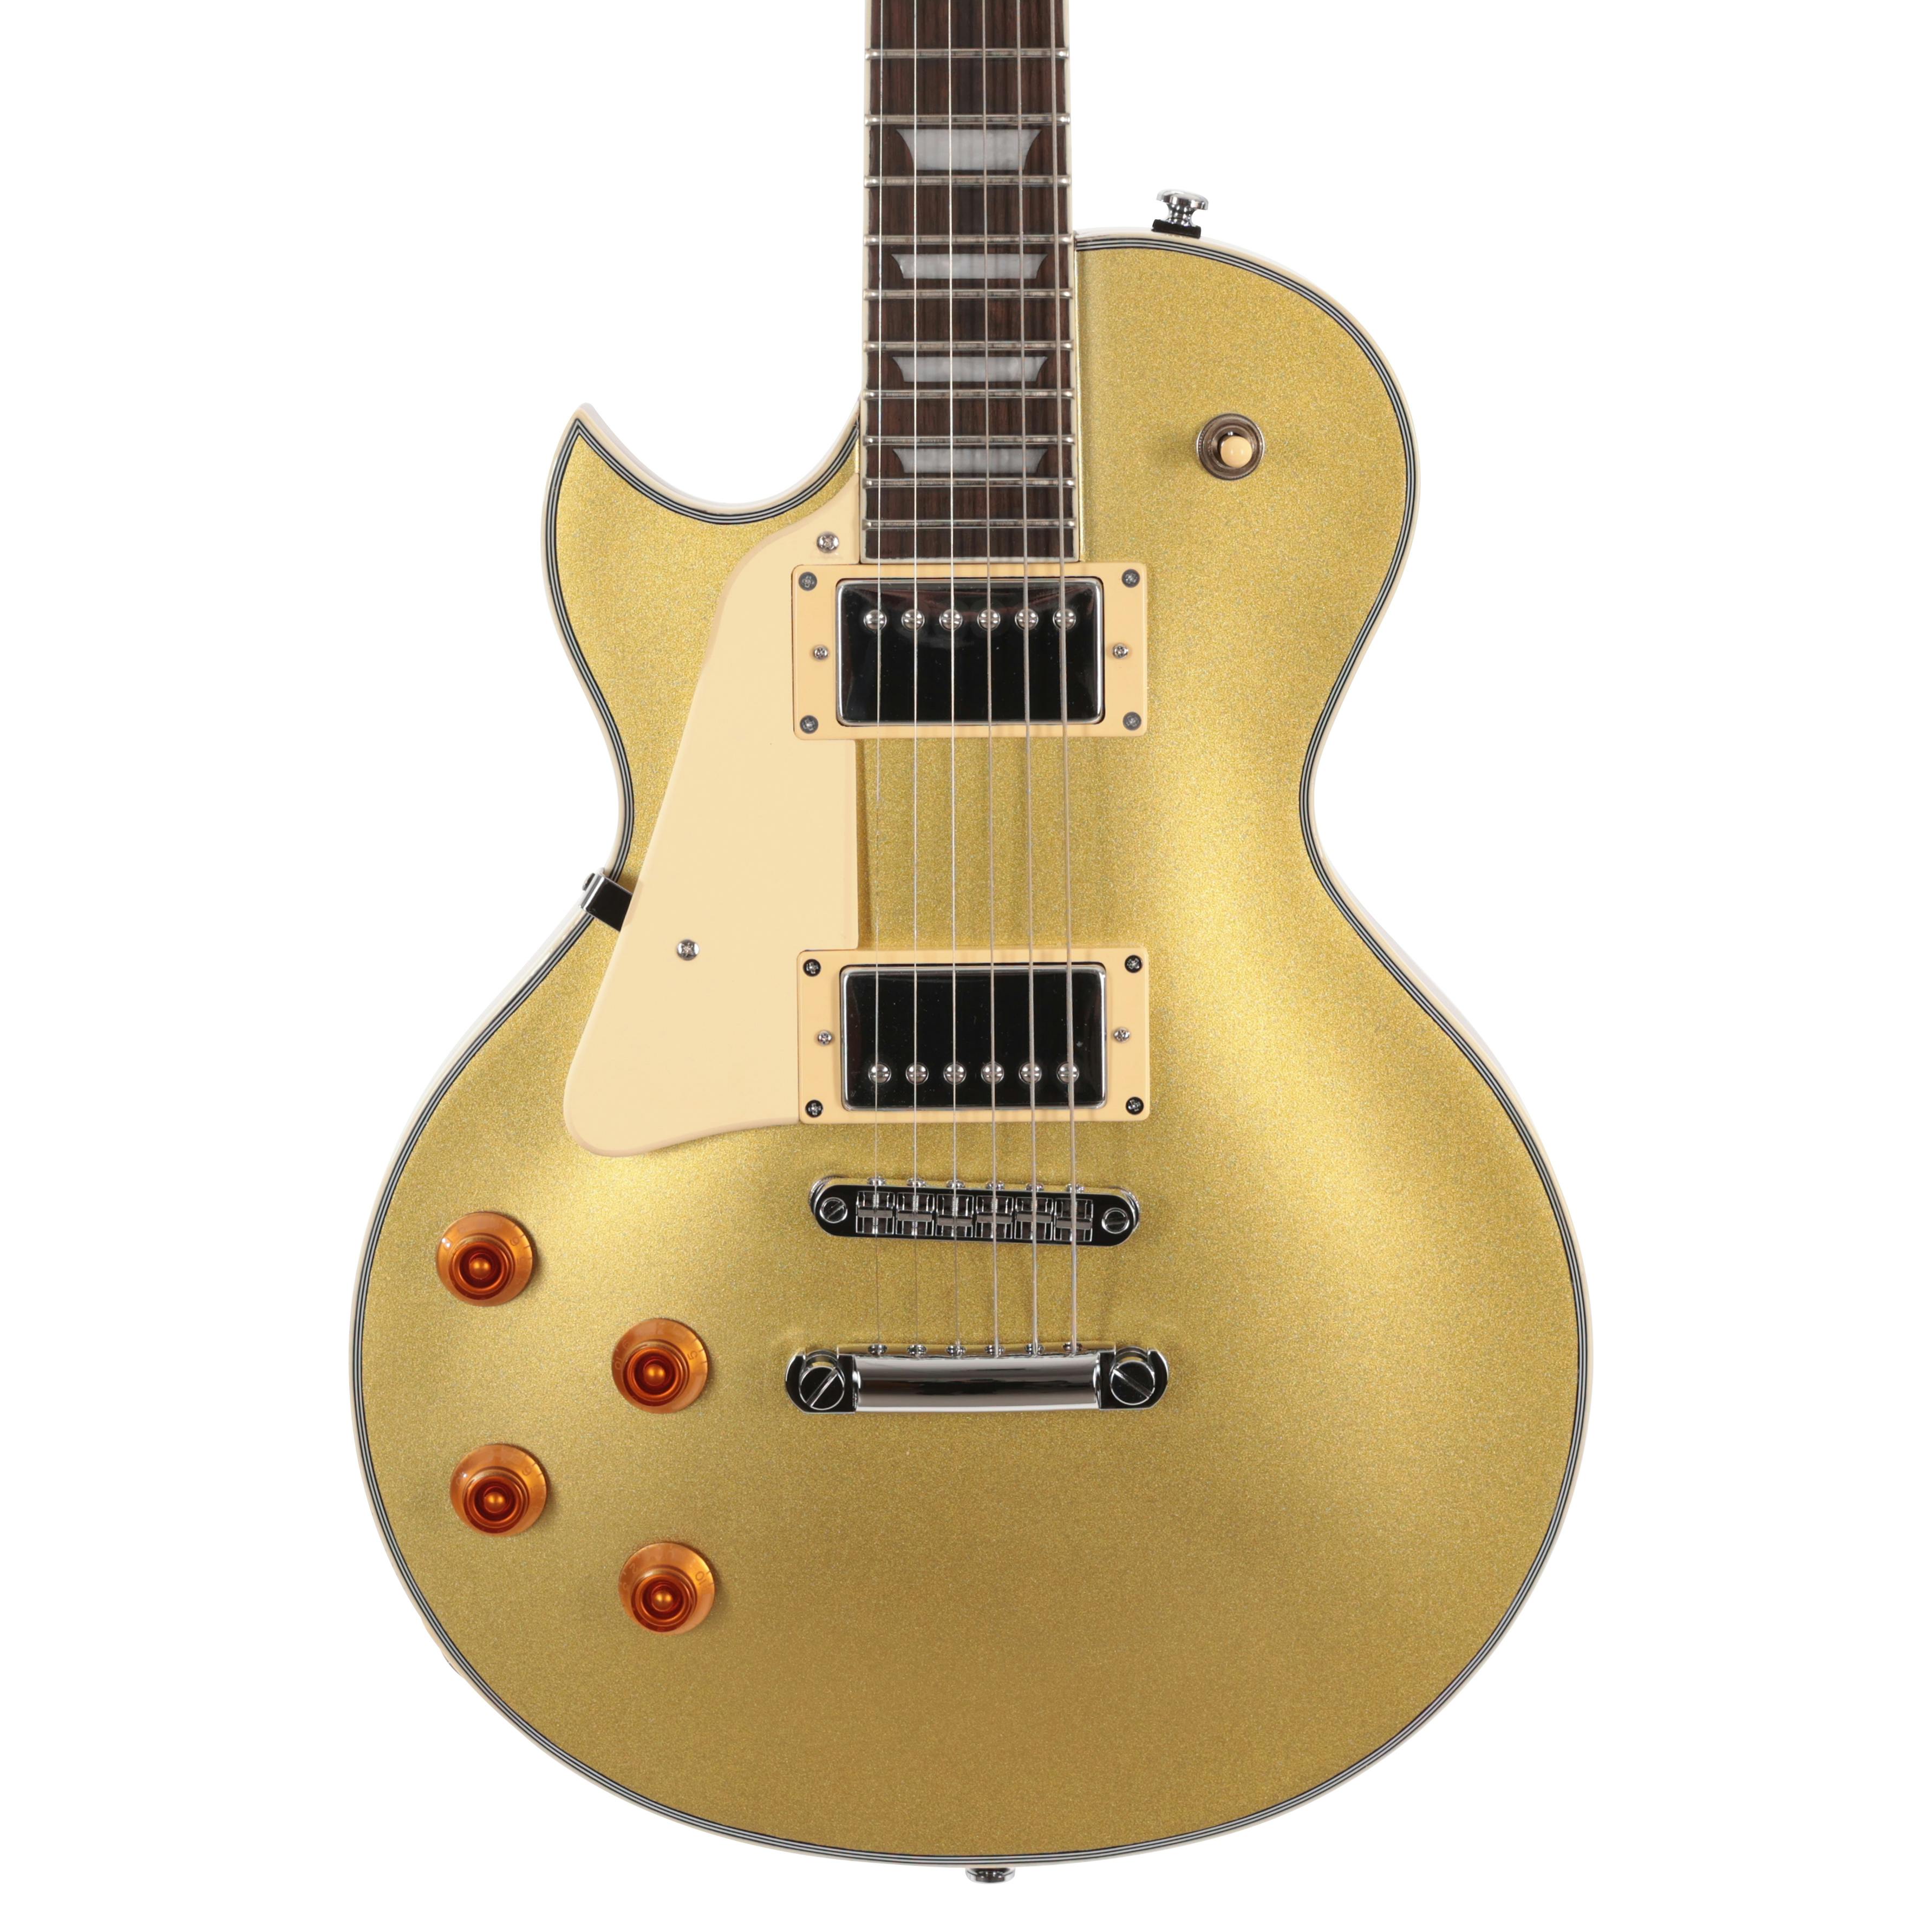 Sire Larry Carlton L7 Left Handed Electric Guitar In Goldtop